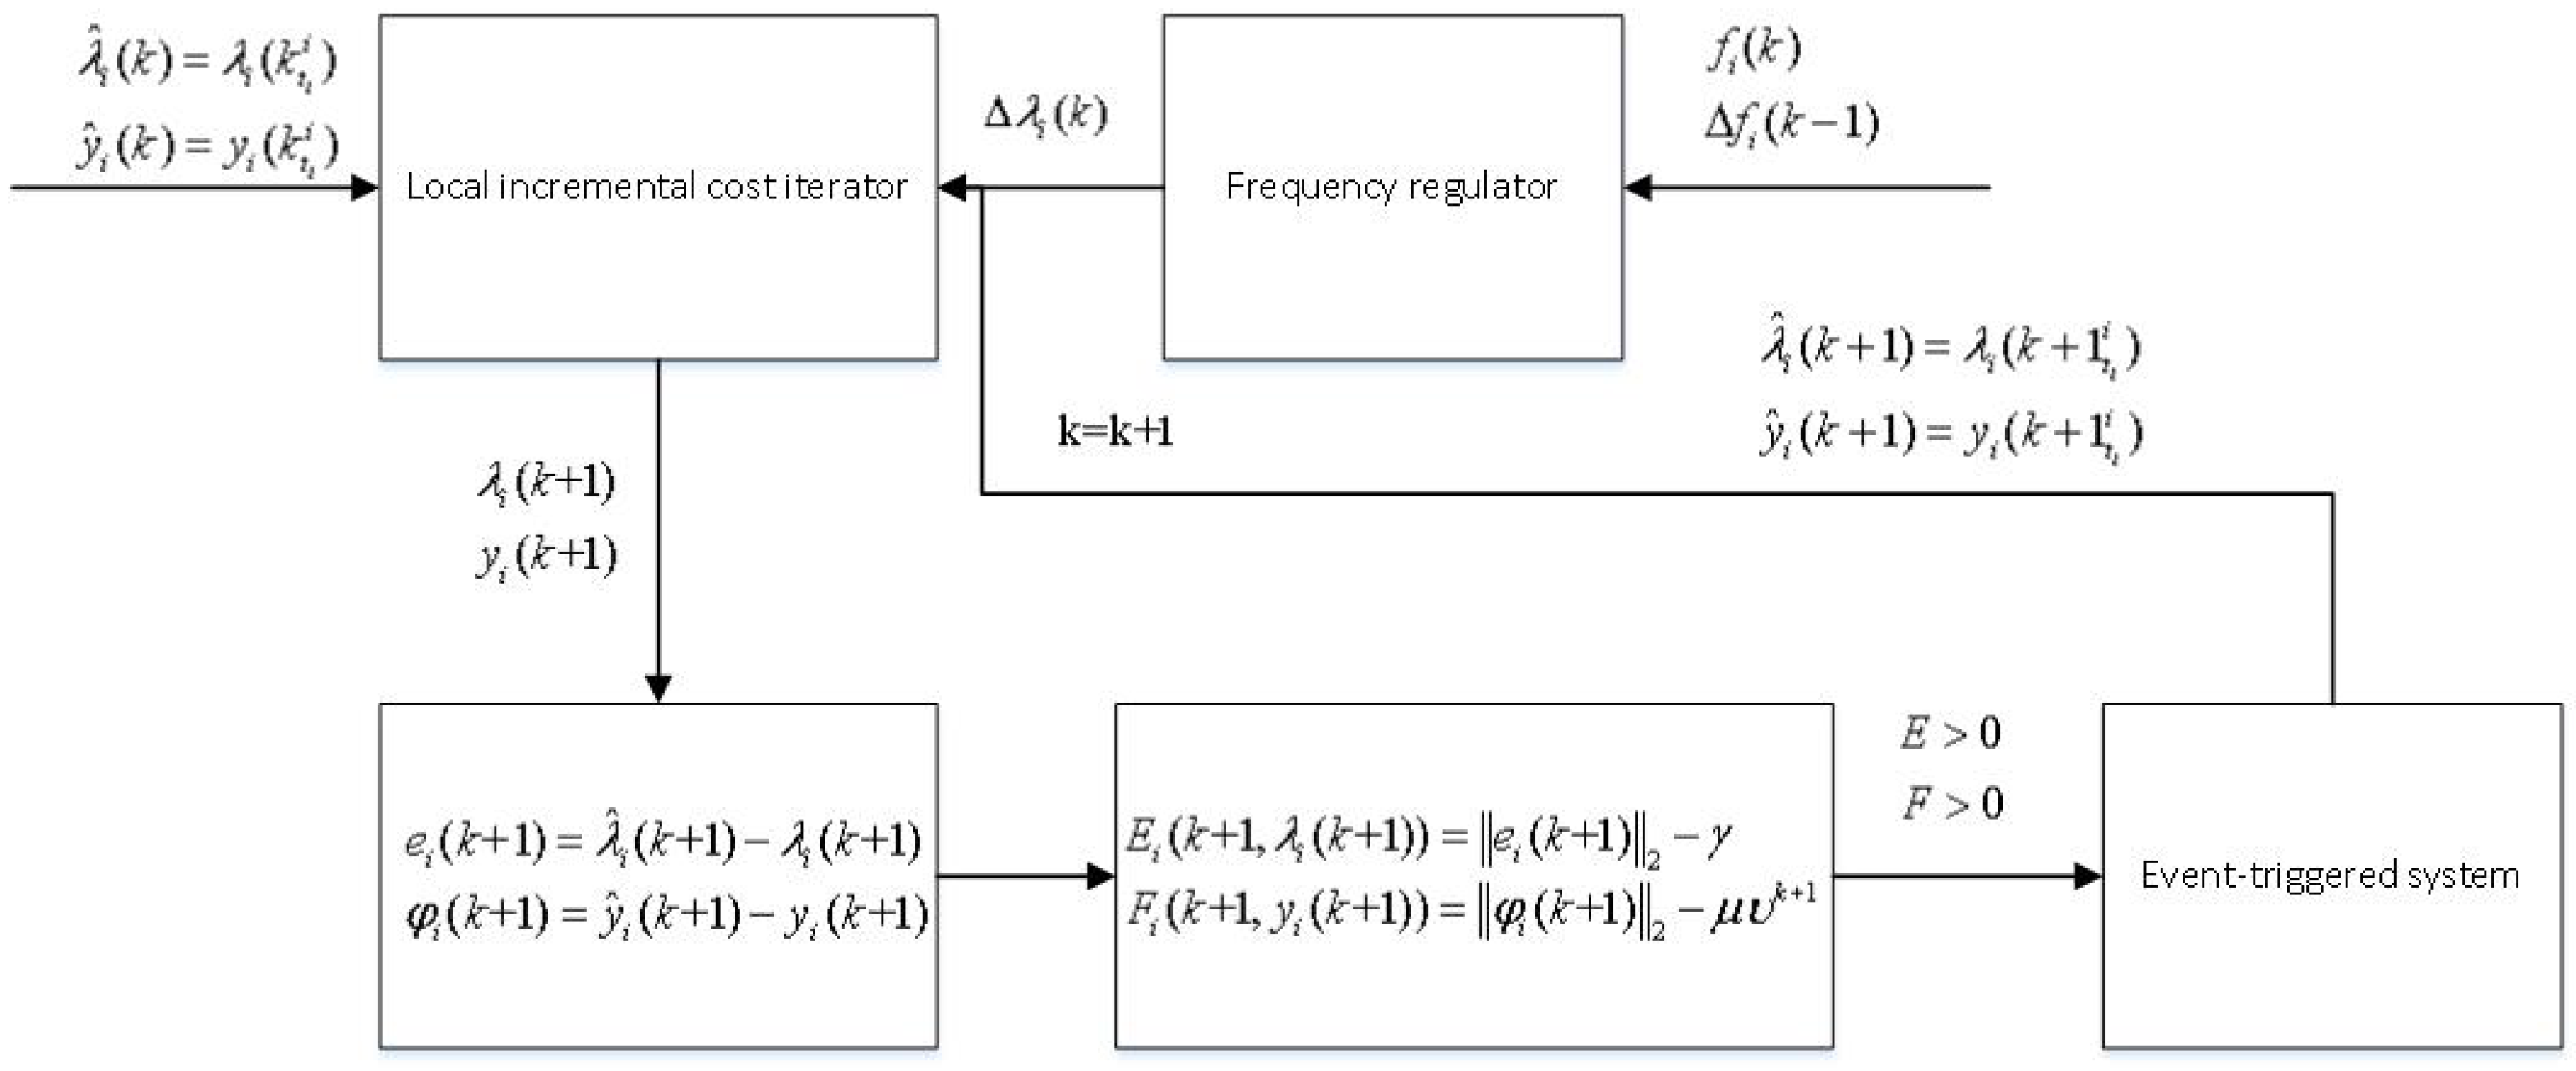 The Iterator Hierarchy. The synthetic iterator protocol extends